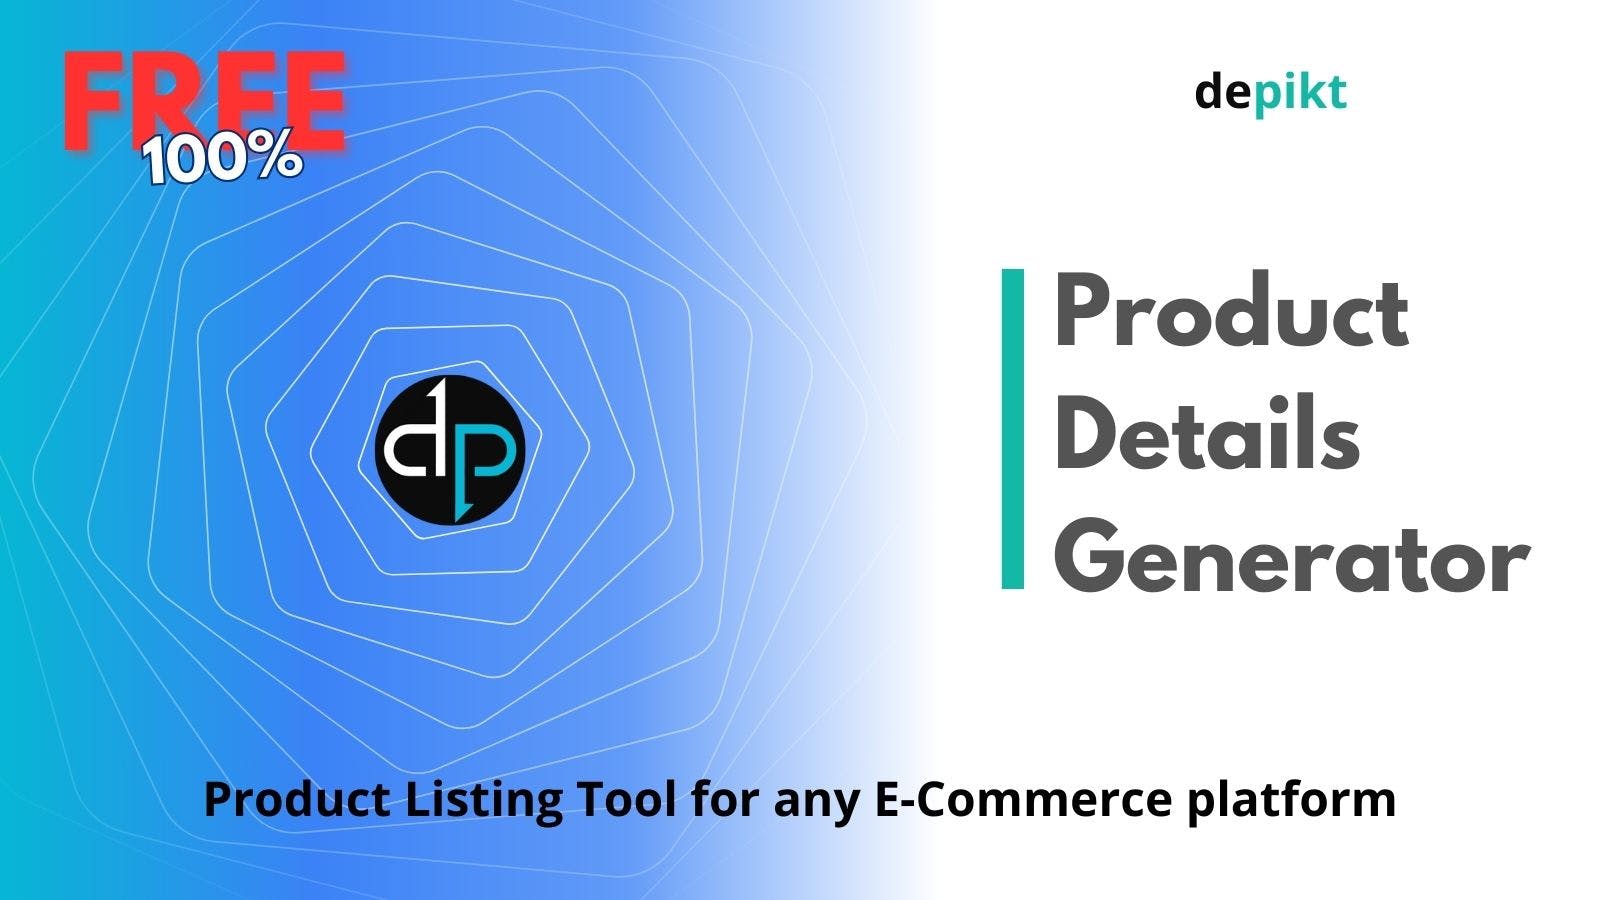 Cover Image for Introducing depikt's FREE Product Details Generator!